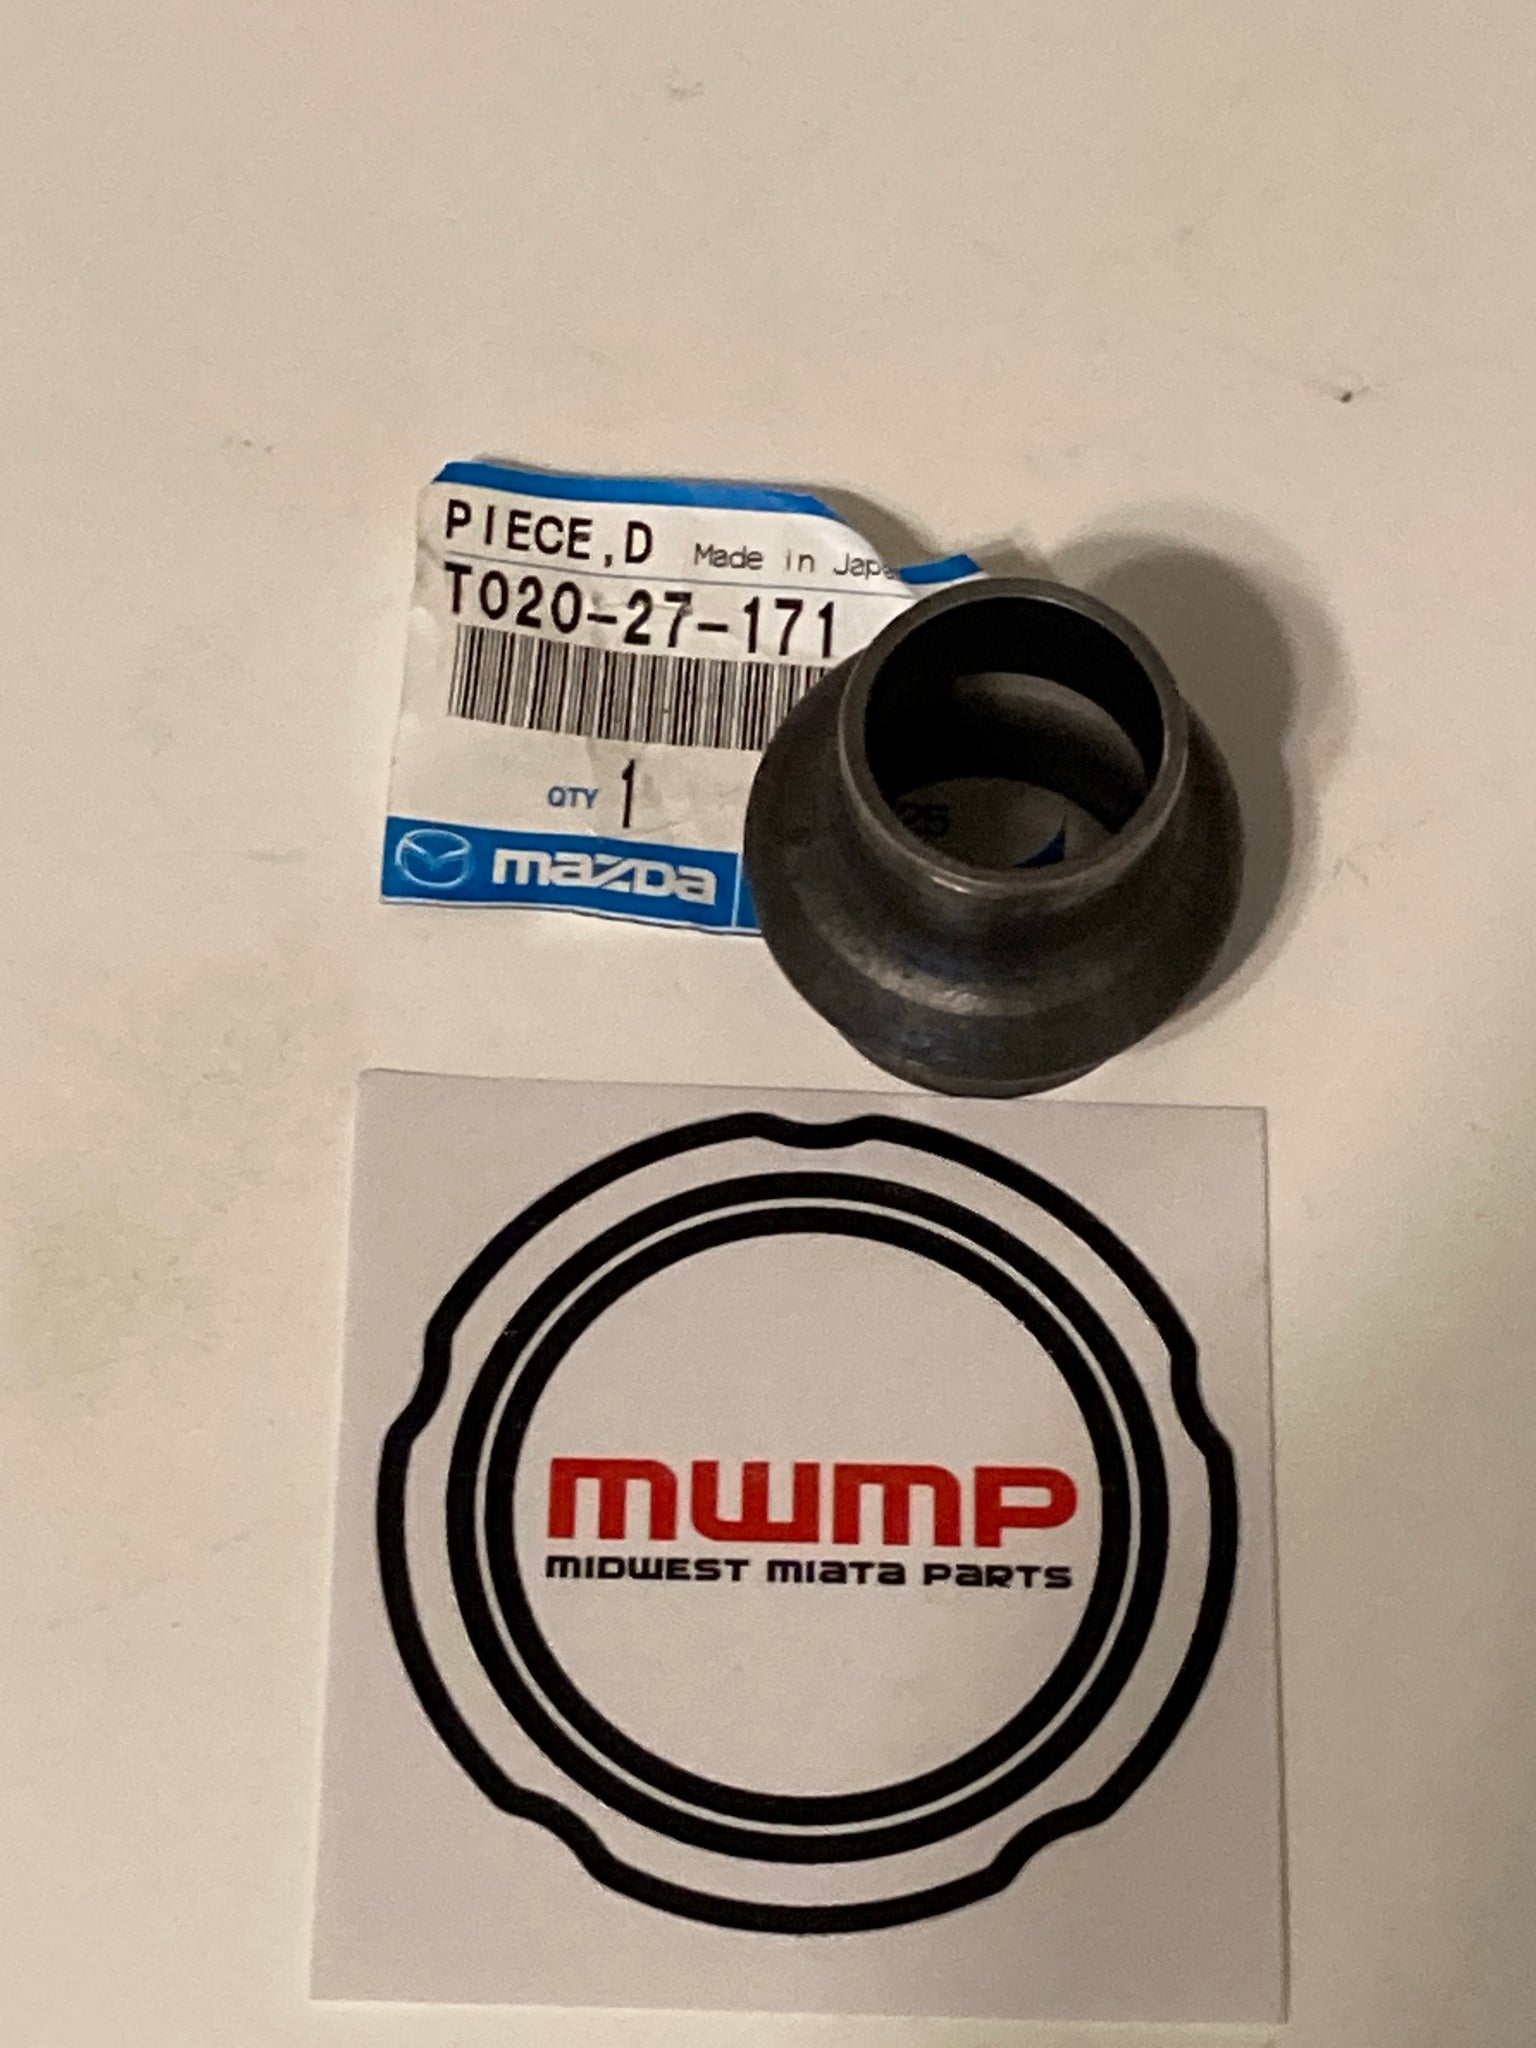 1990-1993 Mazda Miata Differential Pinion Spacer Bearing Crush Washer Distance Piece T020-27-171